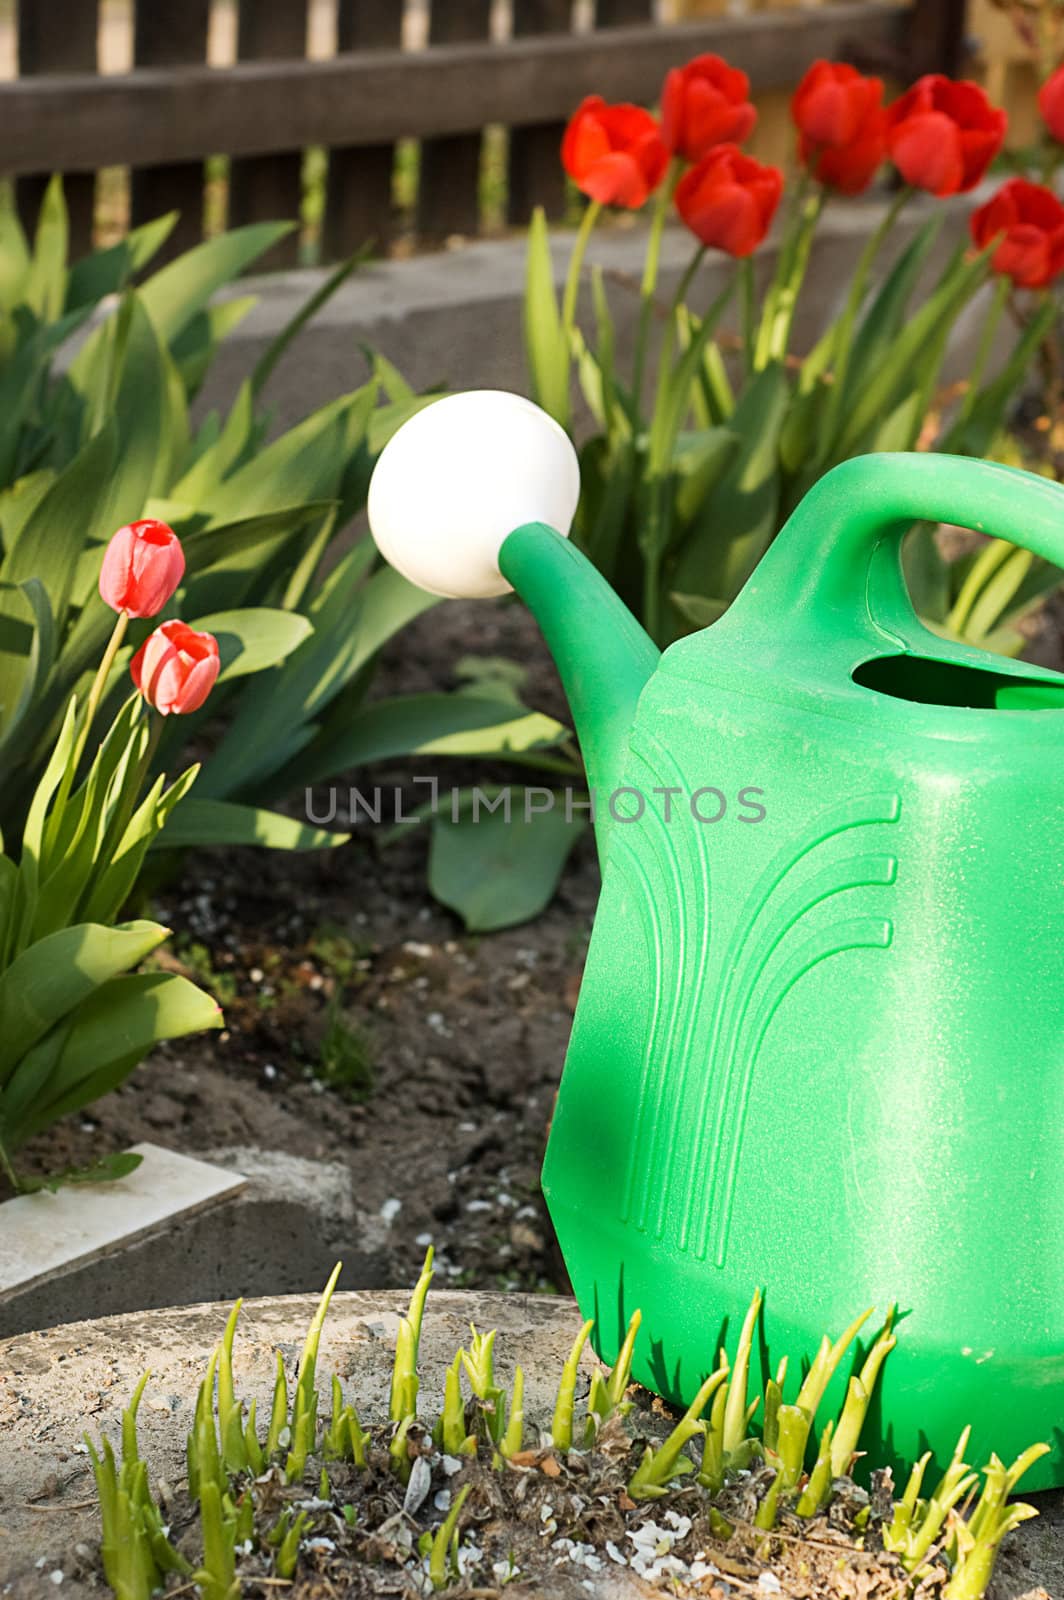 Watering can among red tulips by Angel_a